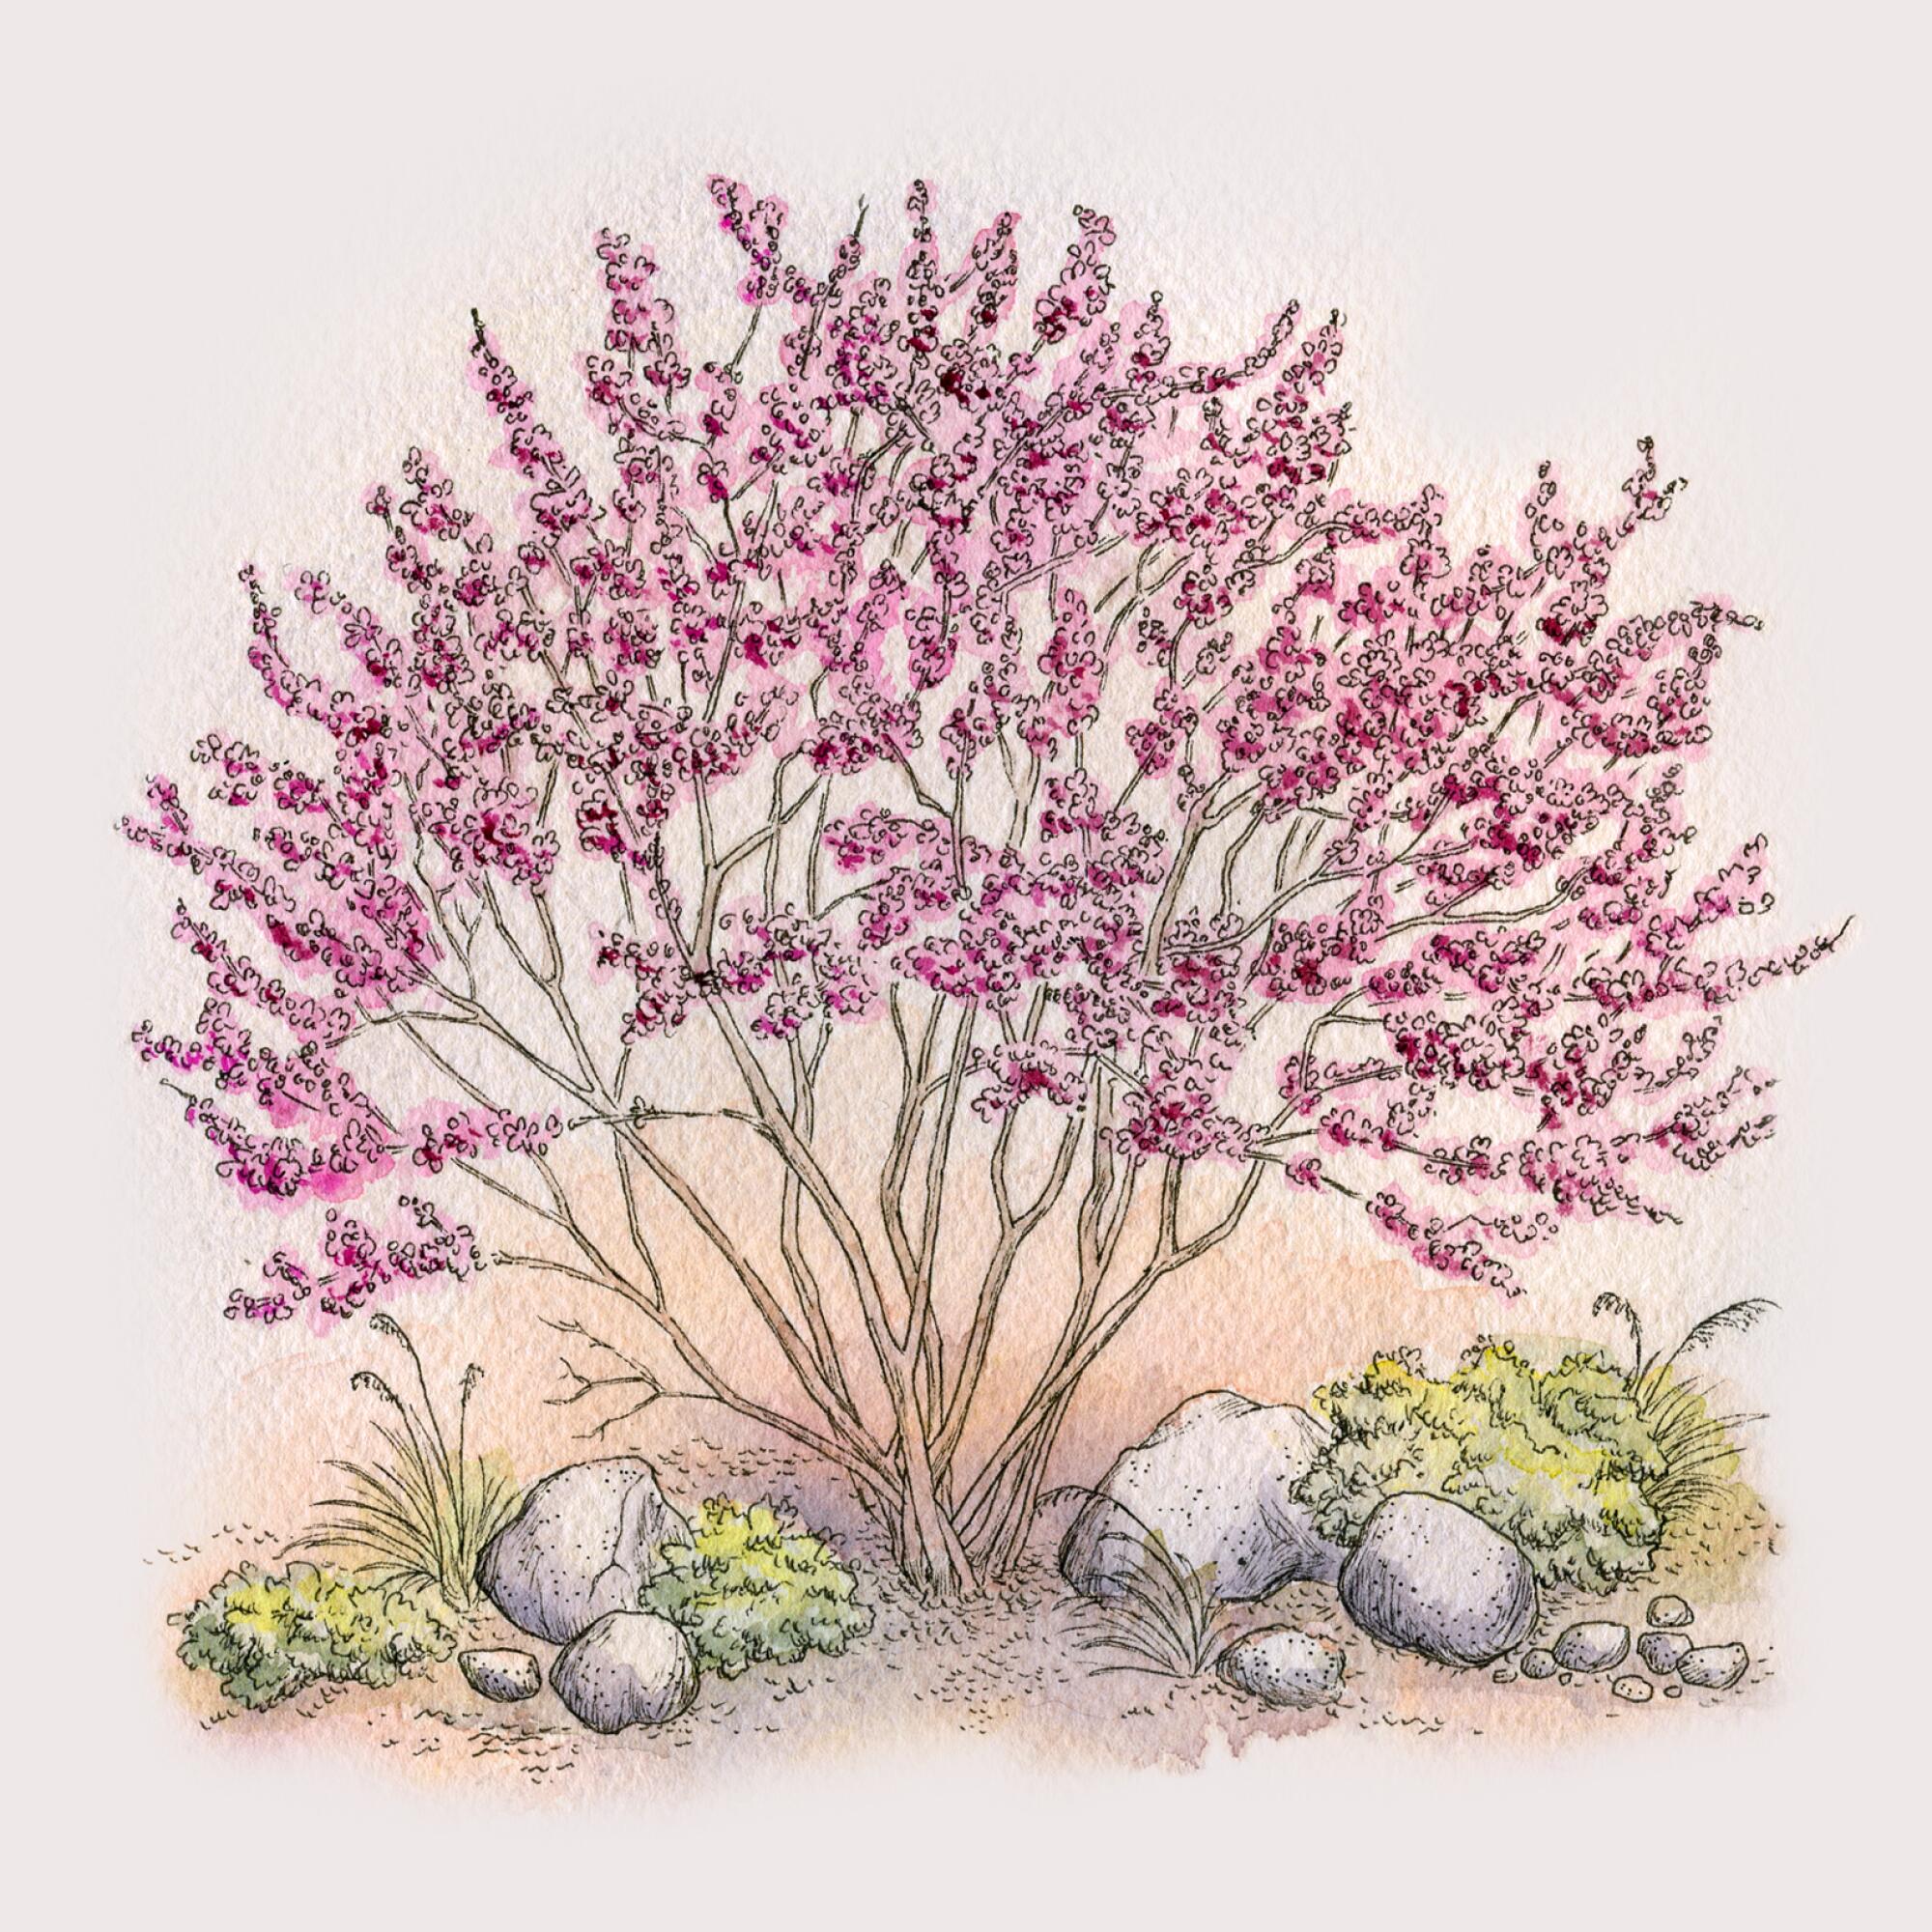 Western redbud tree, with pink flowers on its branches, stands among rocks and smaller plants